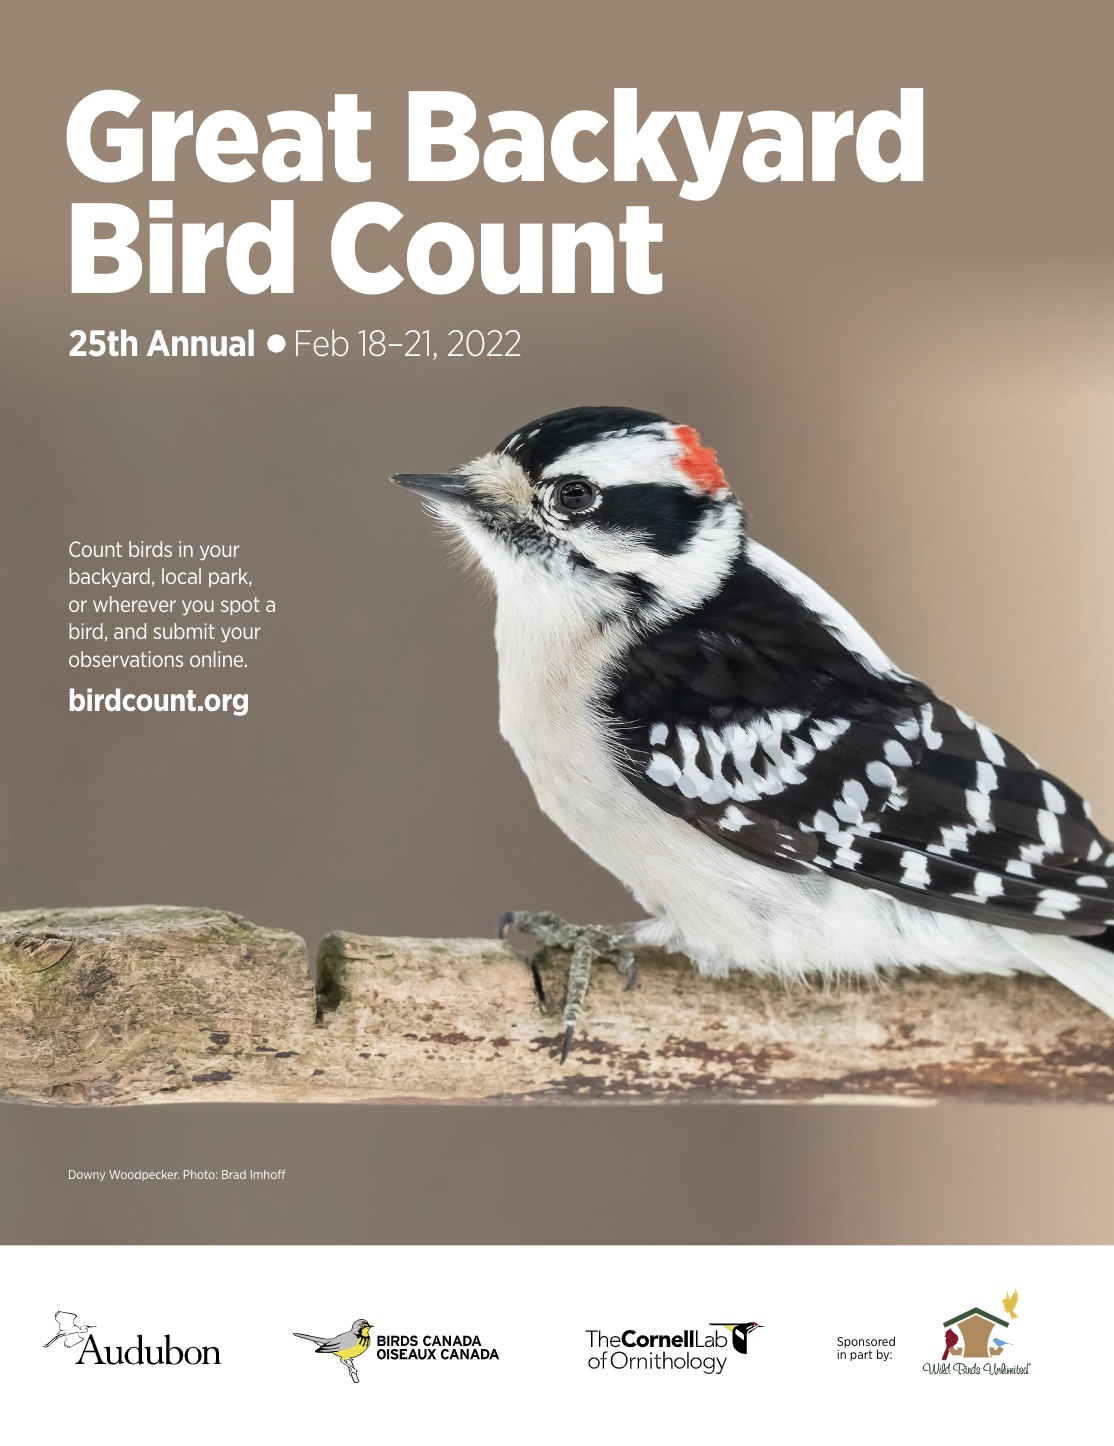 Participate in the Great Backyard Bird Count